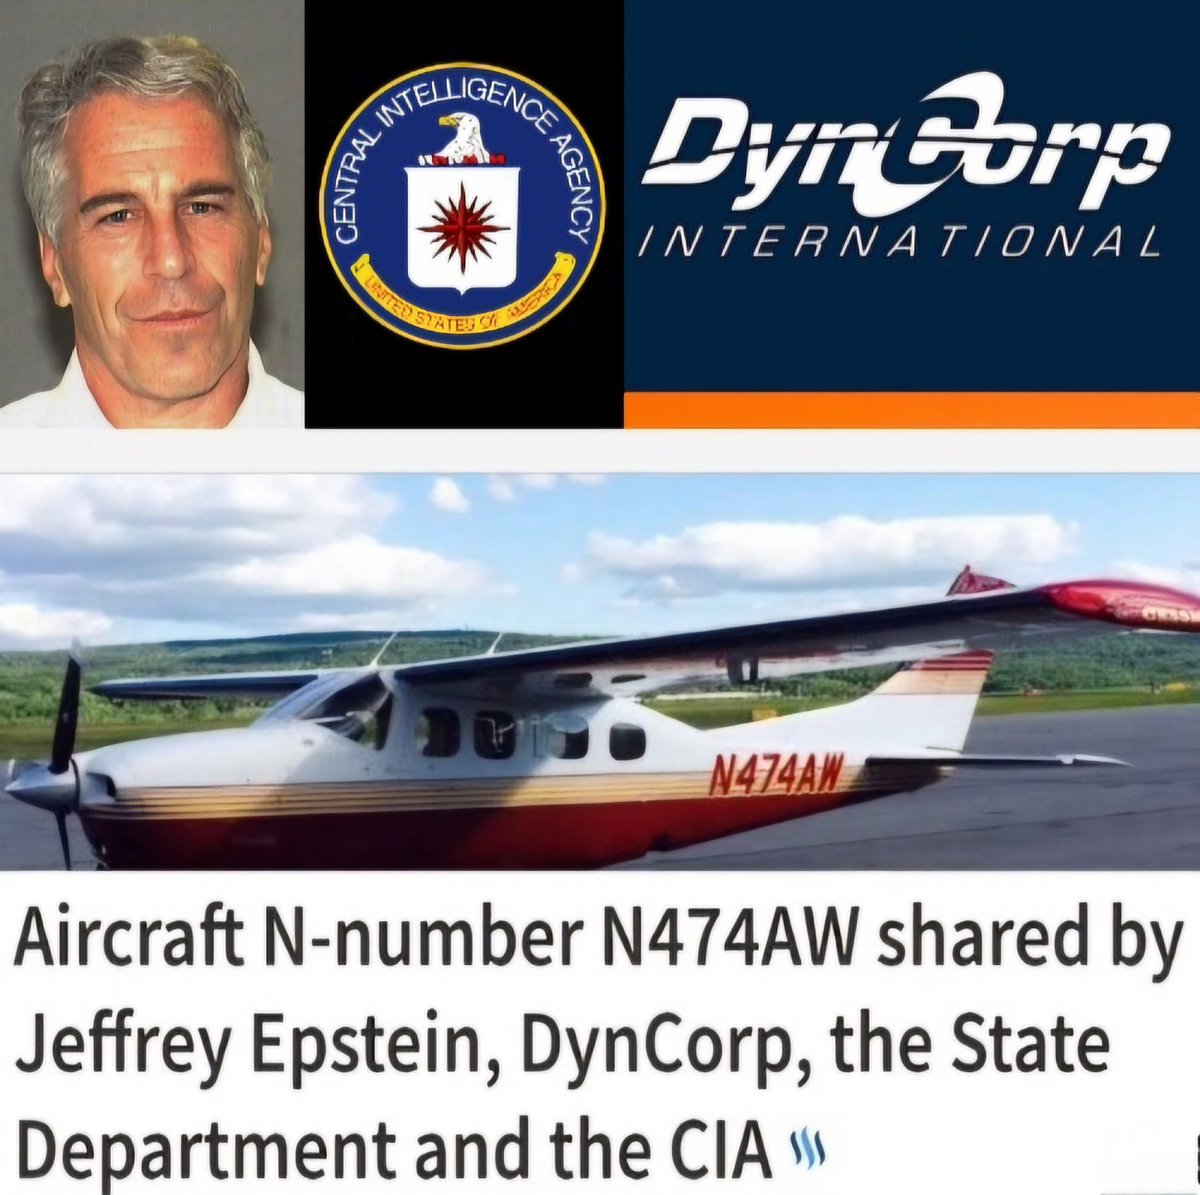 JEFFREY EPSTEIN, CIA, AND DYNCORP MILITARY CONTRACTOR INVOLVED IN CHILD TRAFFICKING Epstein was working with the US government, CIA, and huge military contractor Dyncorp to traffick children in a massive blackmail ring. They tried to bury this story, but we are bringing it back.